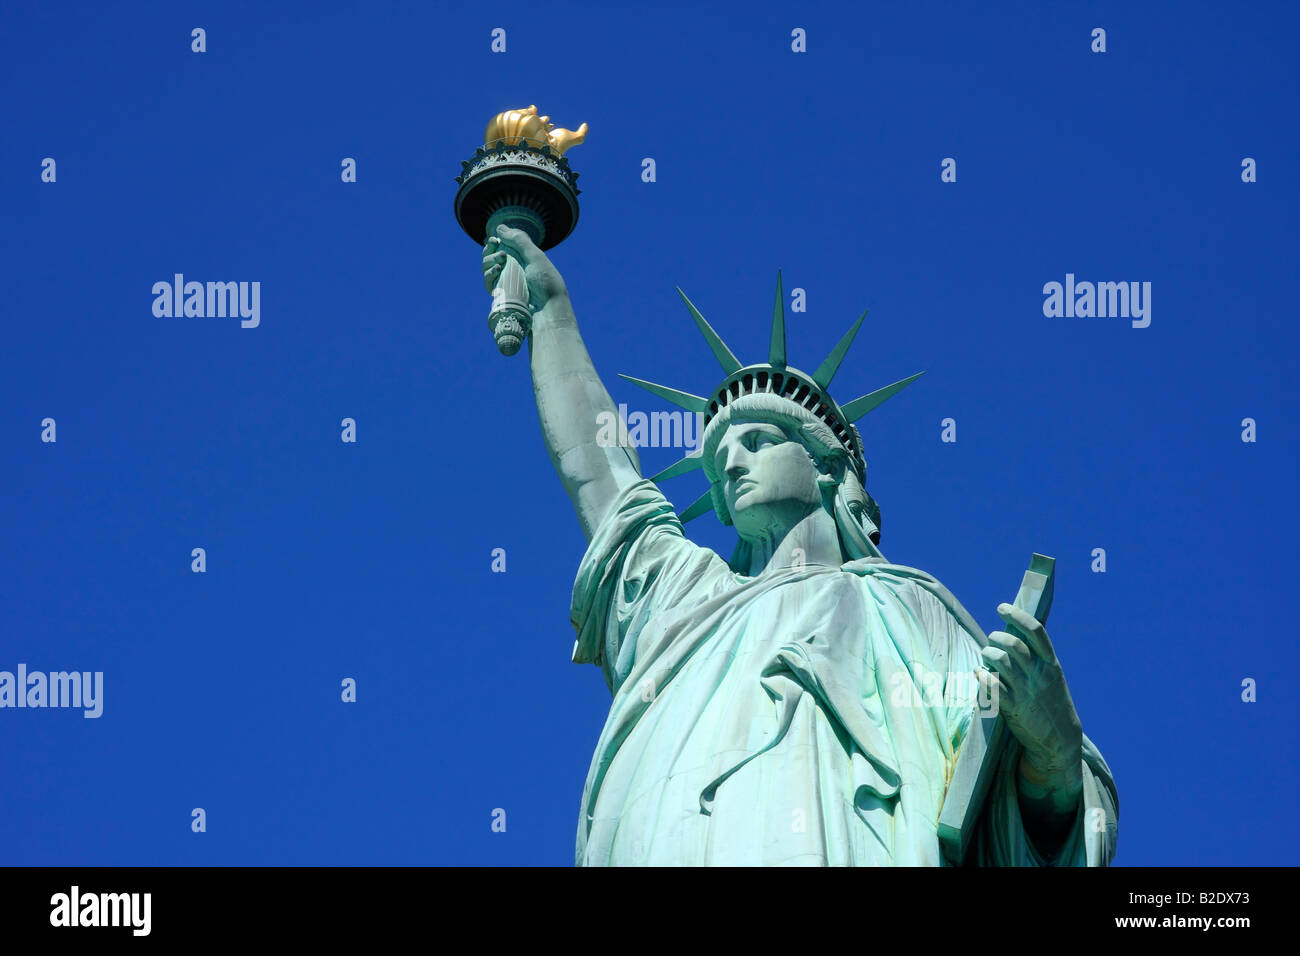 Close up view on the Statue of Liberty - New York City, USA Stock Photo